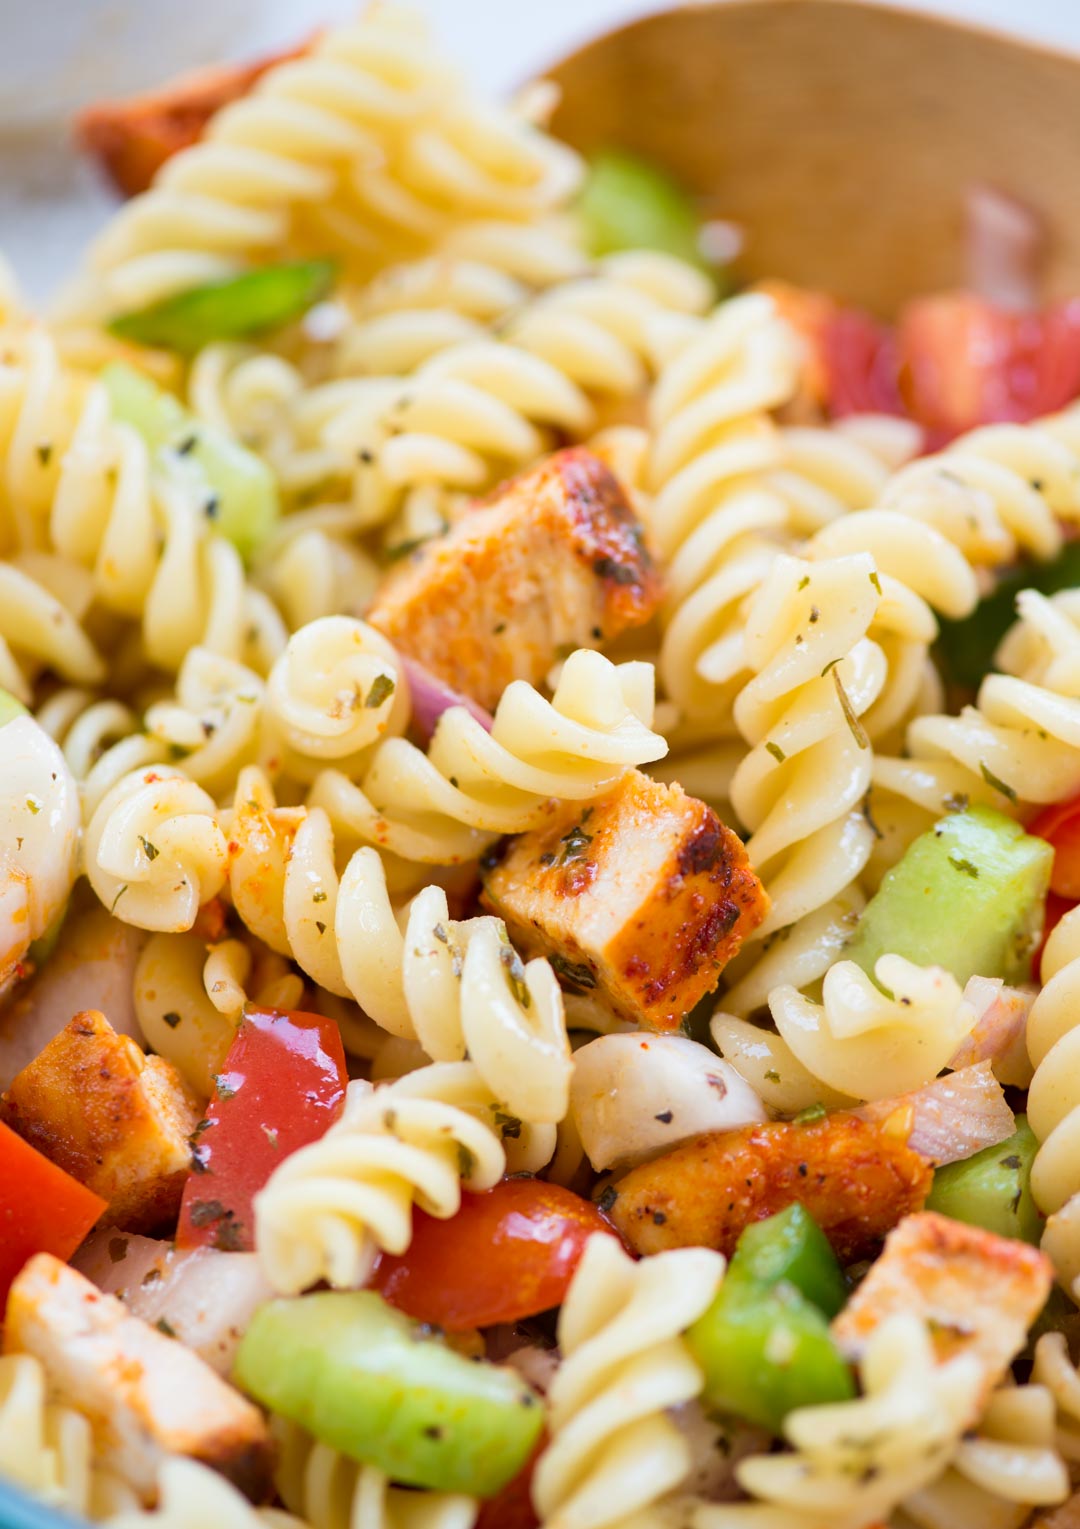 Close view showing chunks of grilled chicken, cooked fusilli pasta and bite-sized vegetables coated with lemon dressing.